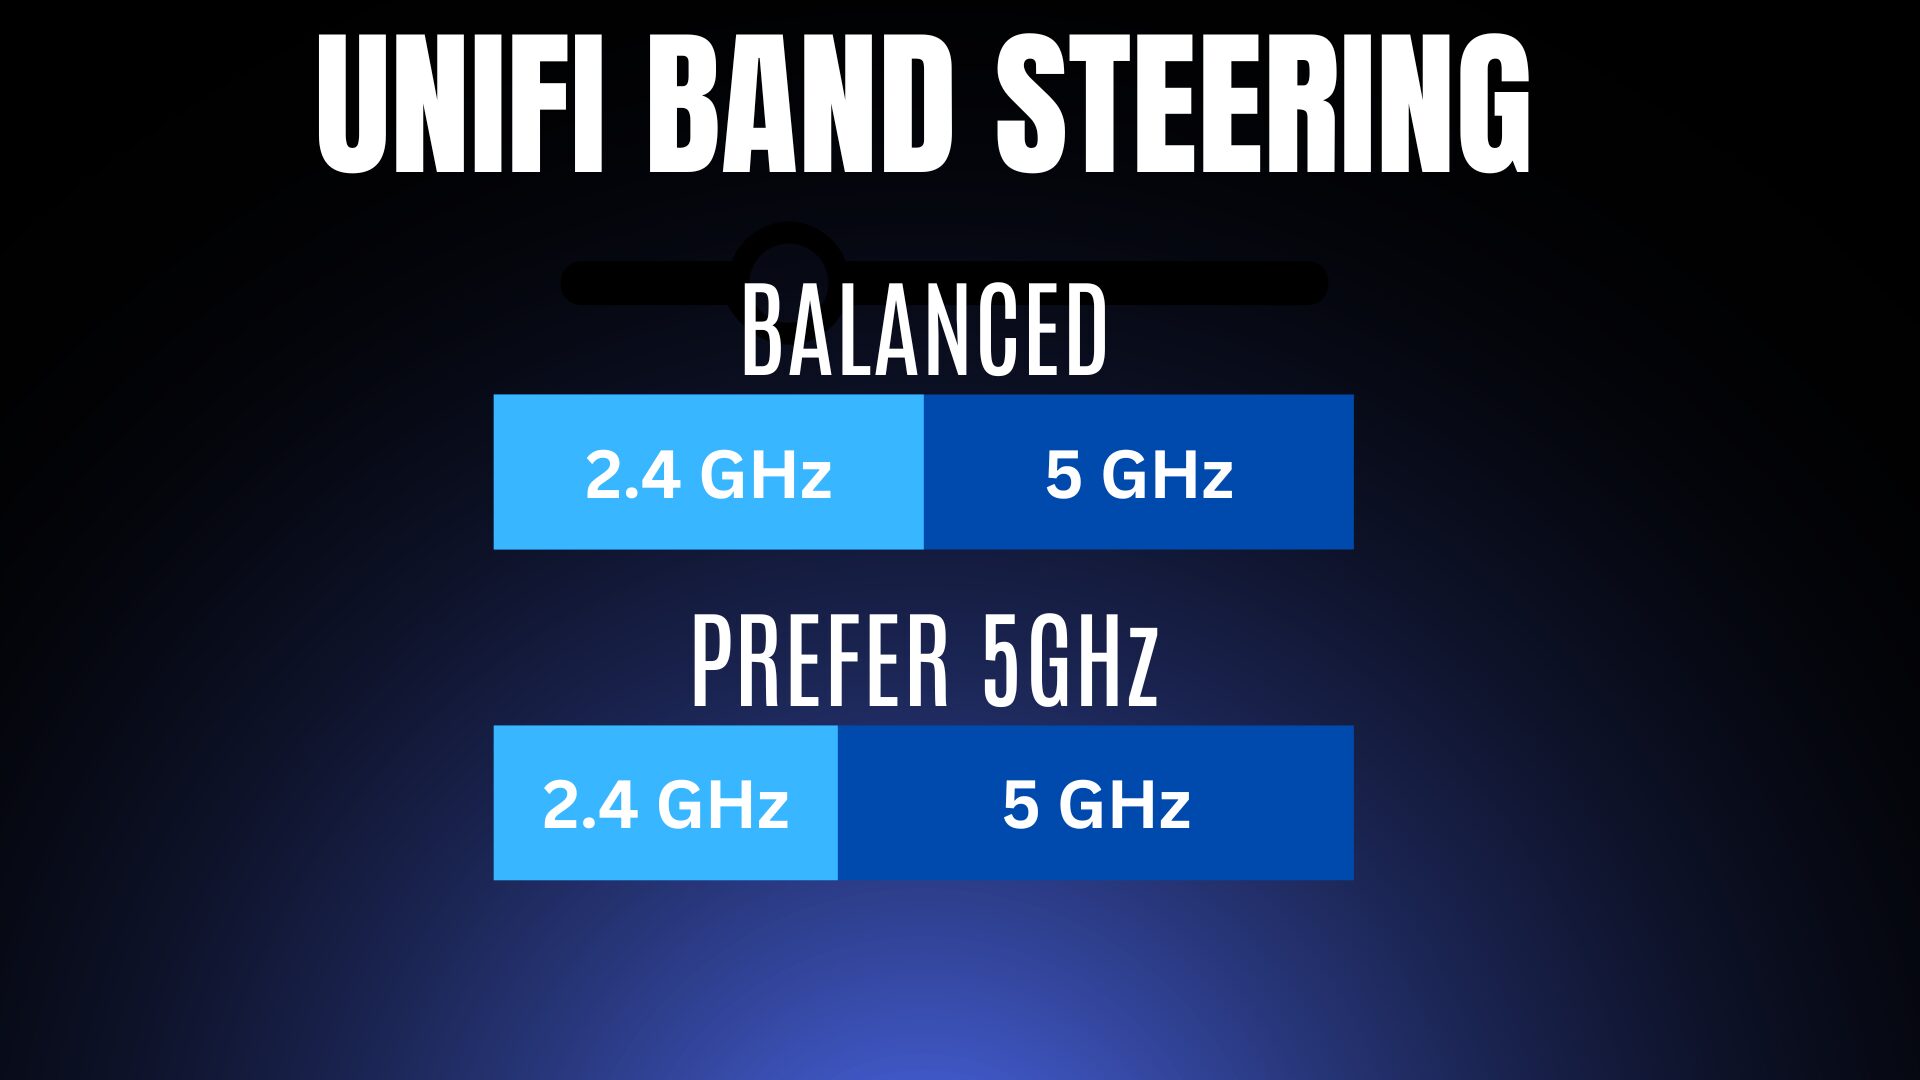 band steering differences between balanced and prefer 5ghz.